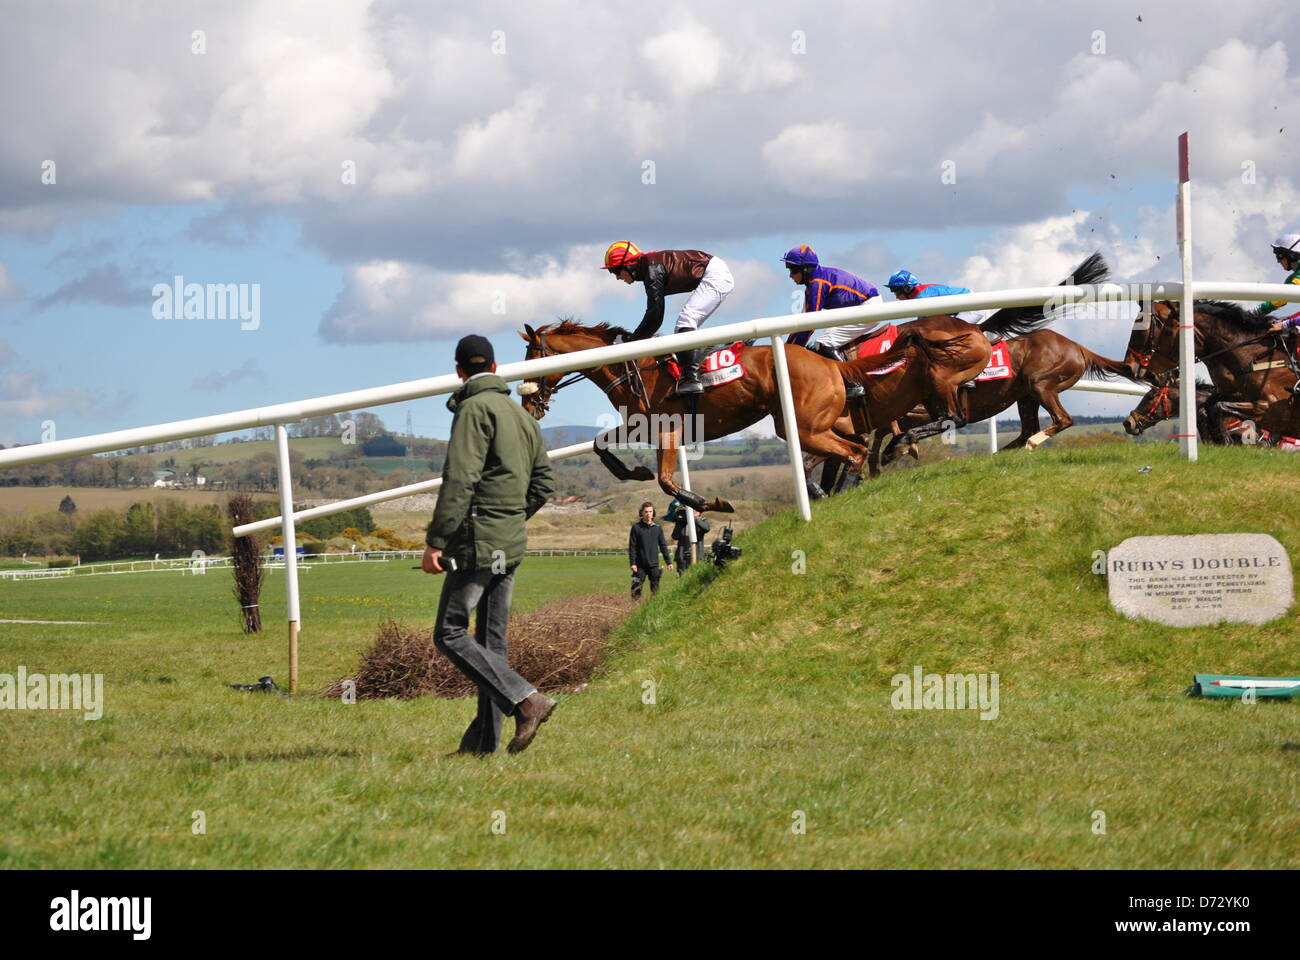 punchestown race course naas co kldare today saturday 27th april 2013 national hunt racing horses and jockeys jumping rubys double in the cross country race today photo taken by Linda Duncan alamy live news Stock Photo